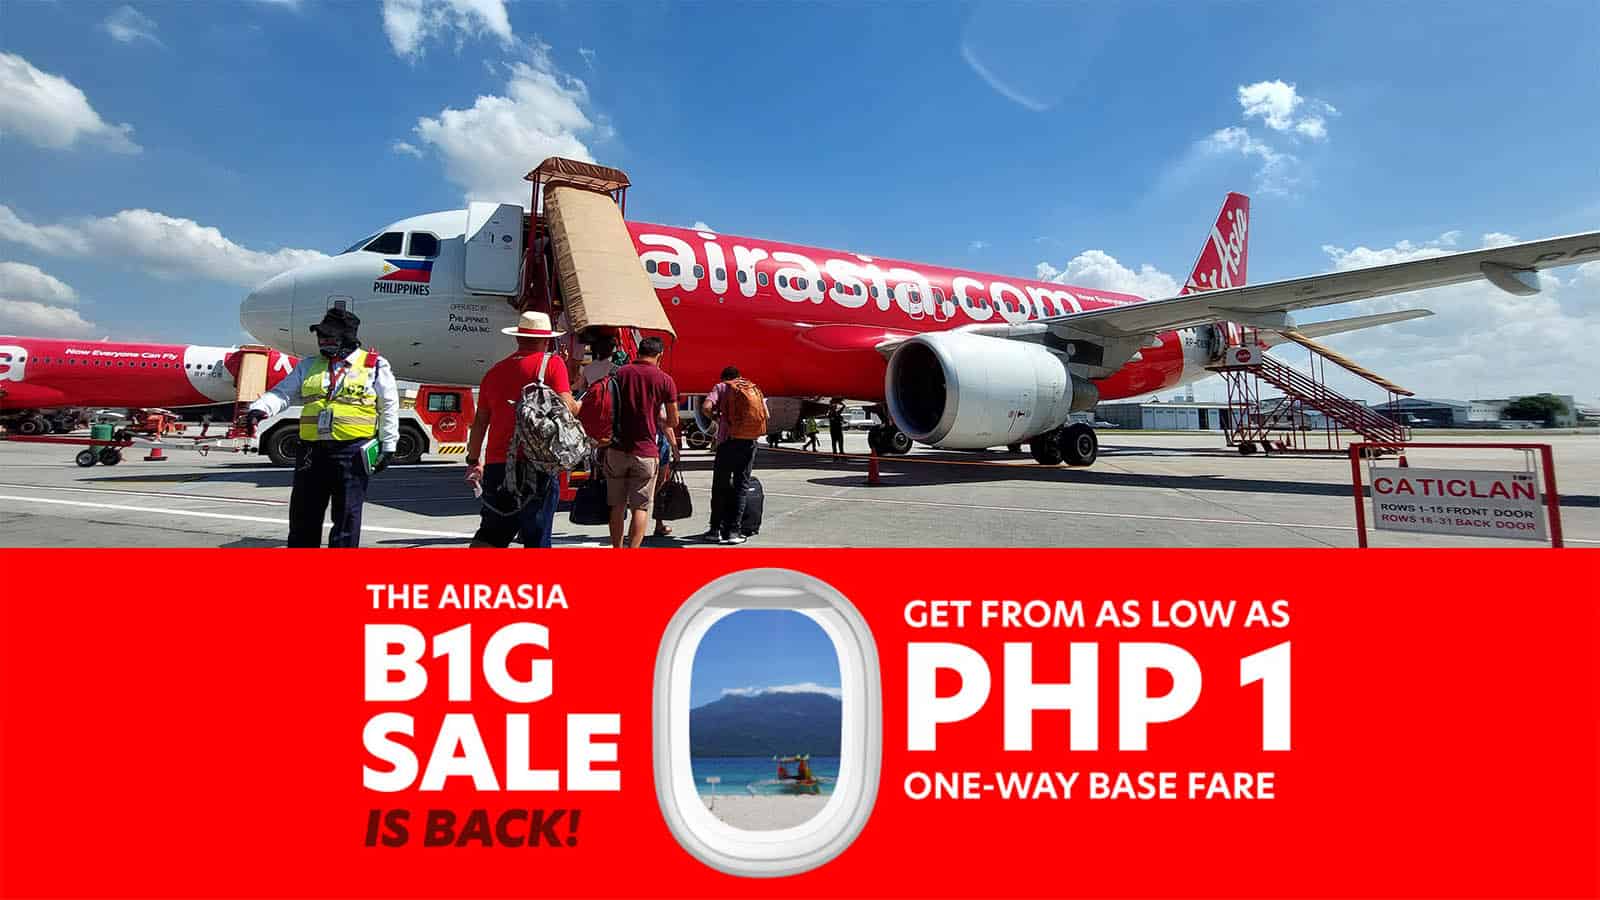 AIRASIA PROMOS & PISO SALE 2022-2023 + How to Book Successfully